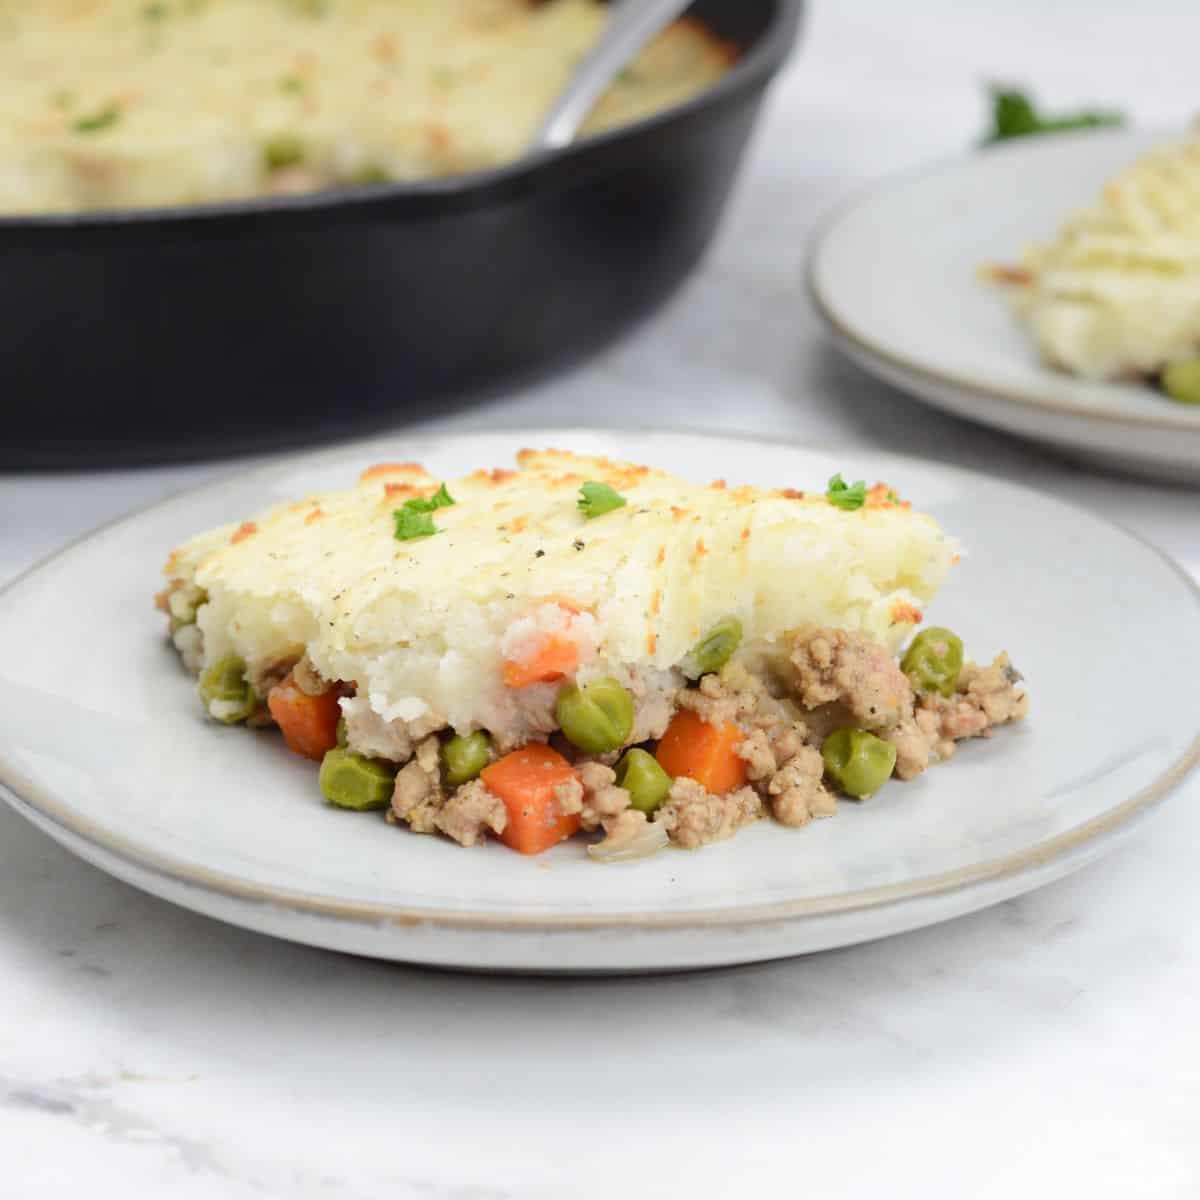 Plate of turkey shepherd's pie sits on a plate. Cast iron skillet and a small plate sit behind